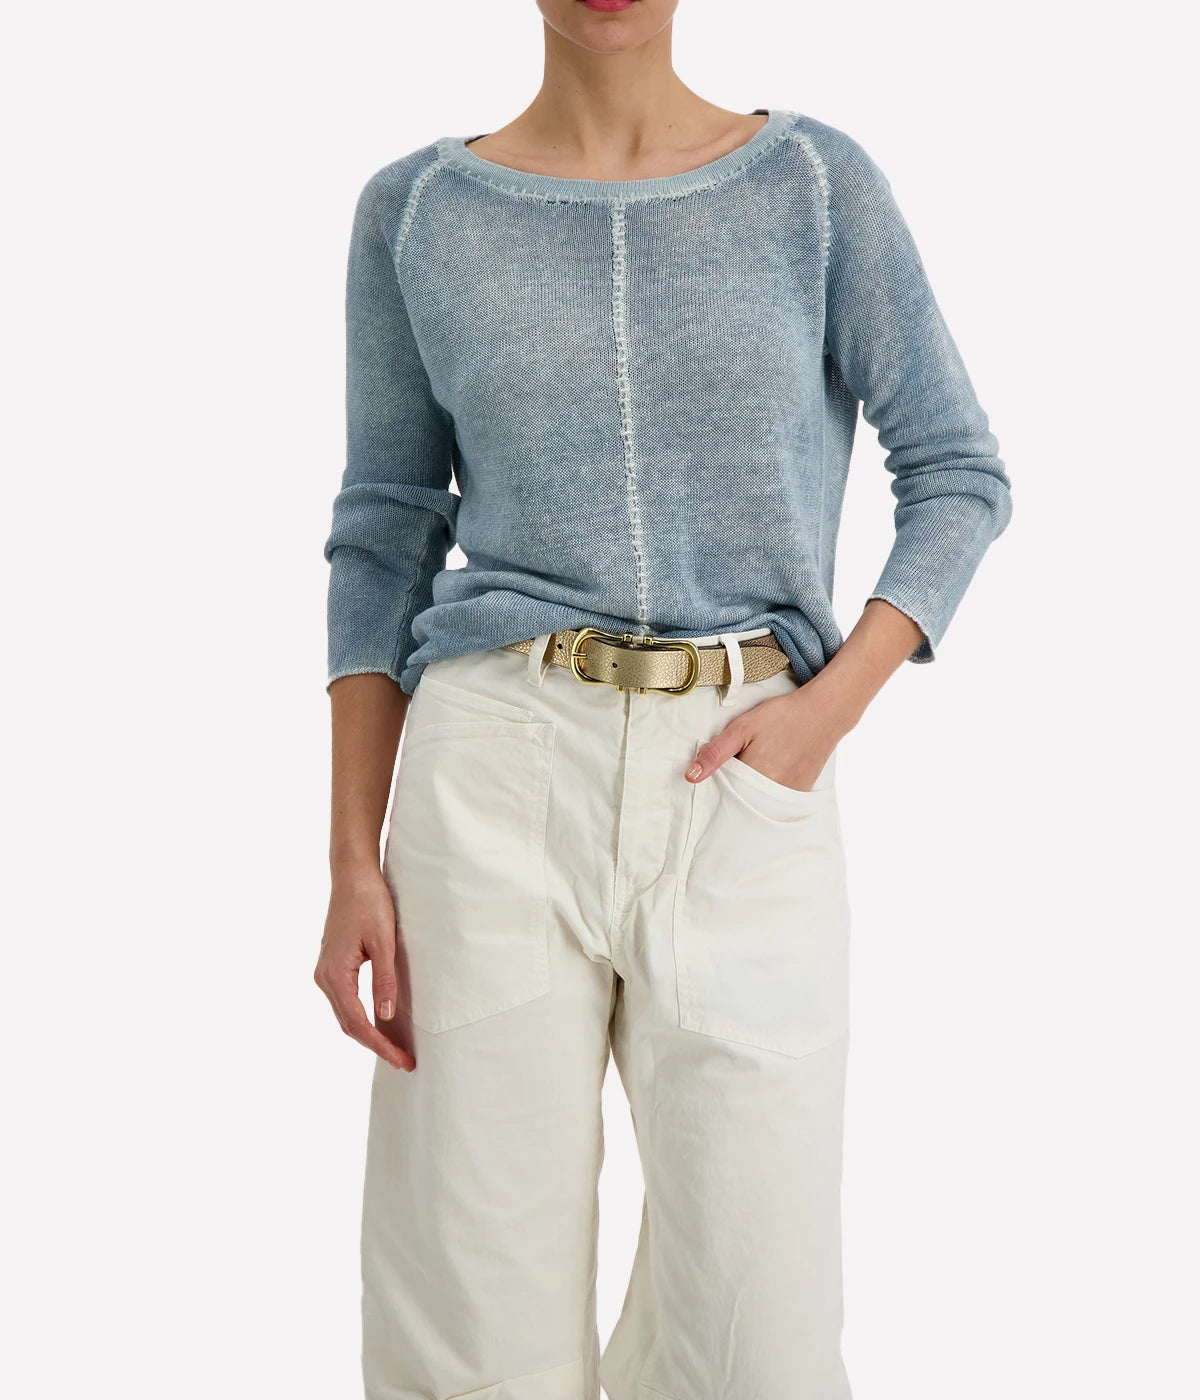 Muted blue linen boatneck knit sweater with decorative accentuated stitching by Avant Toi